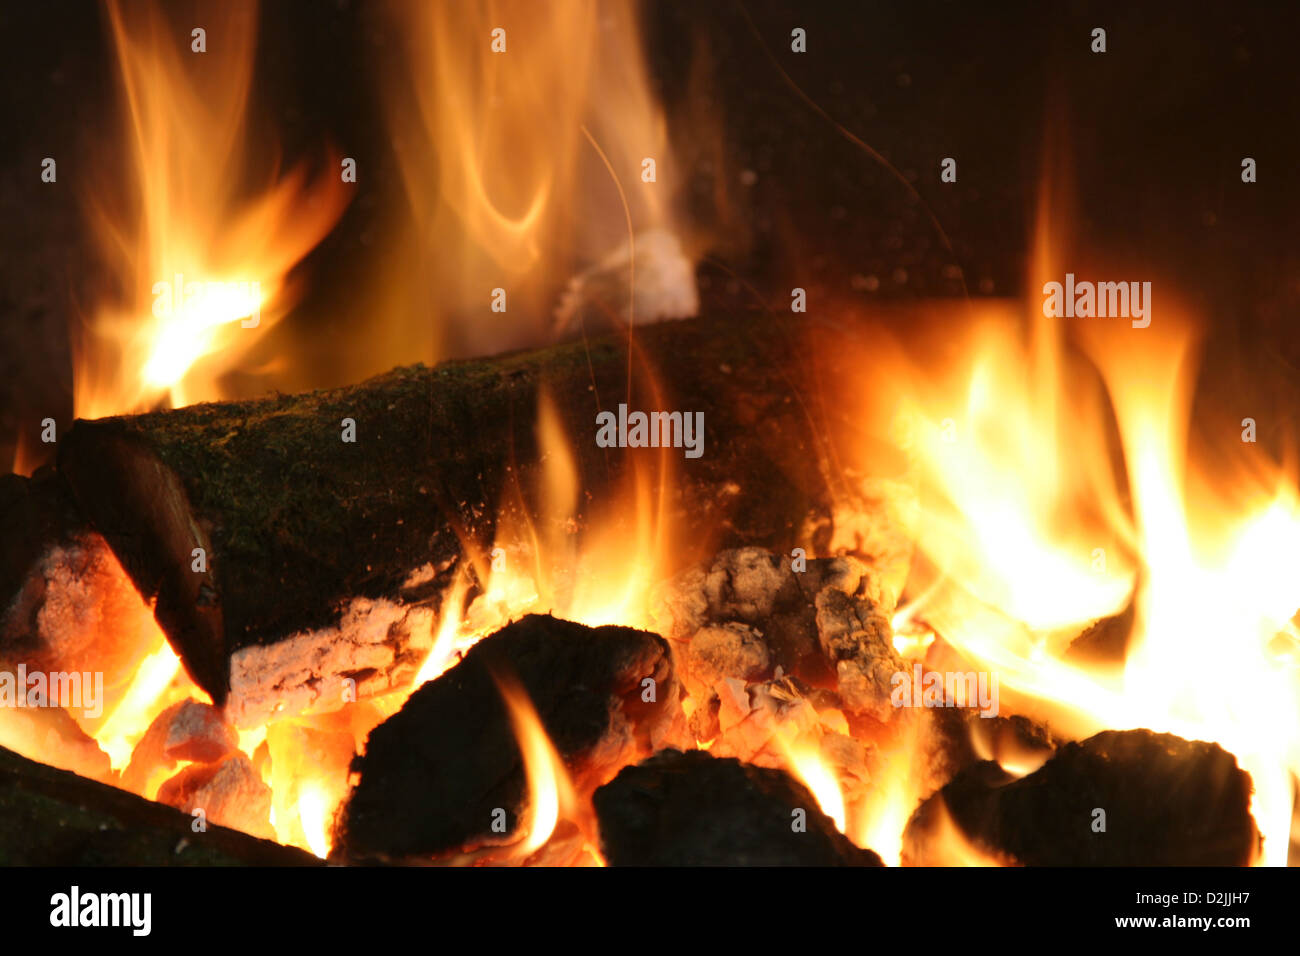 A roaring, orange and red close up of a log fire Stock Photo